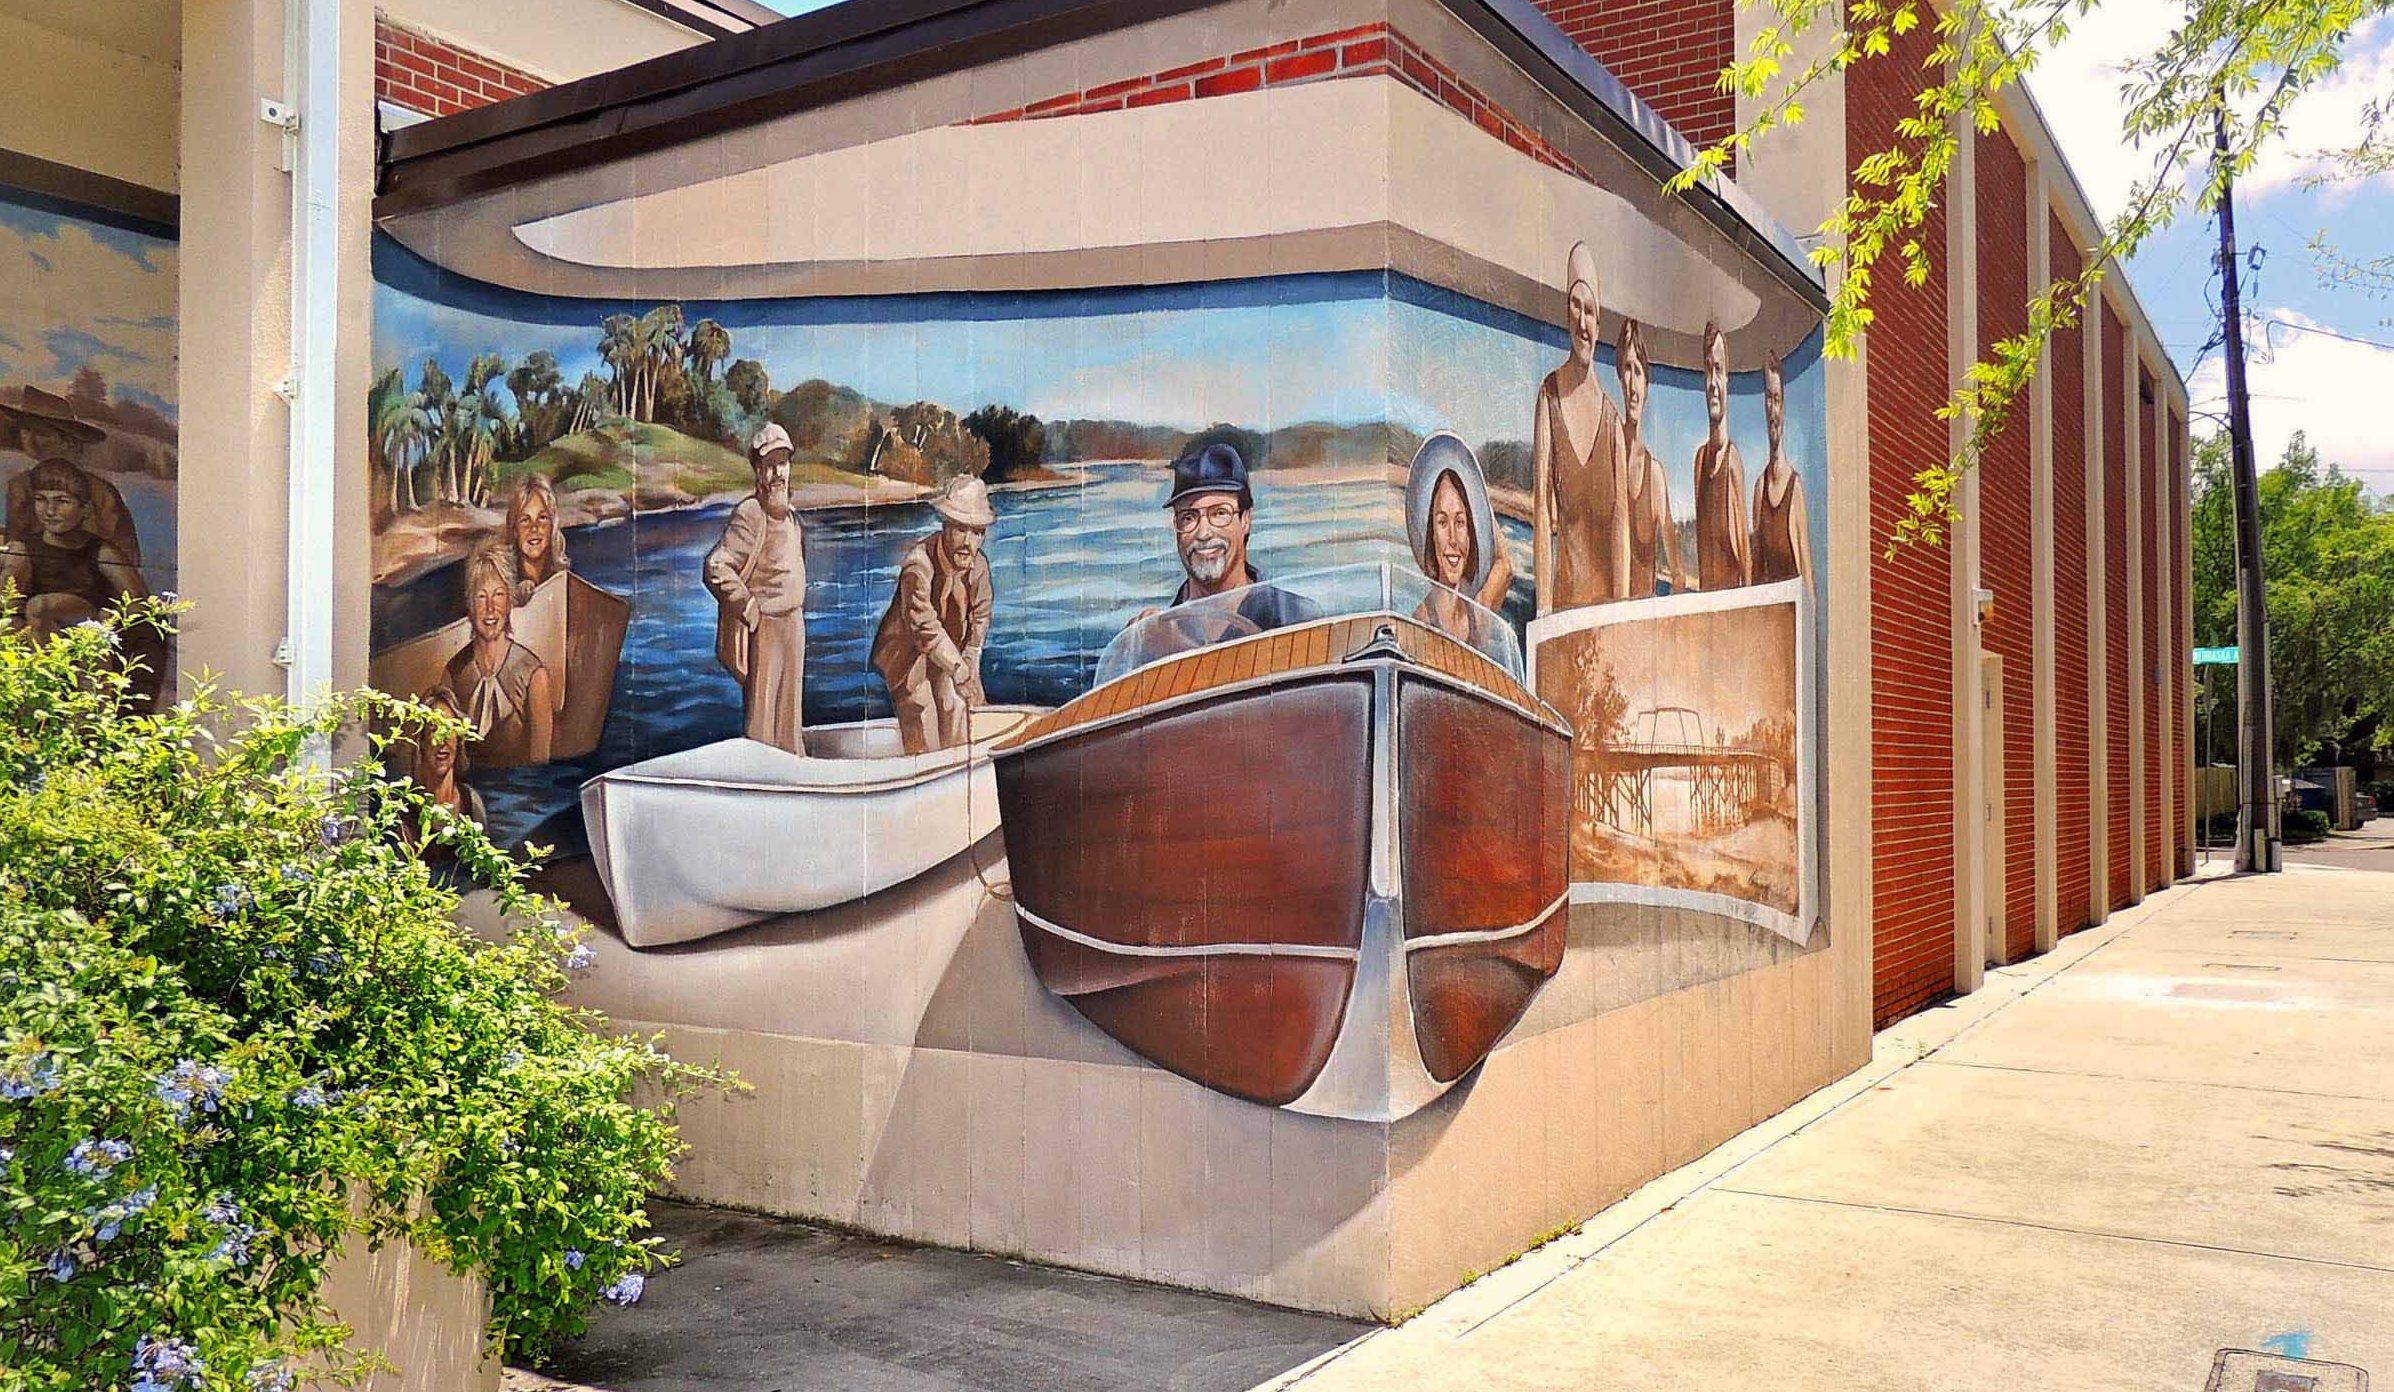 Corner of a building with a mural of happy boaters painted on it. A sidewalk stretches off into the distance.